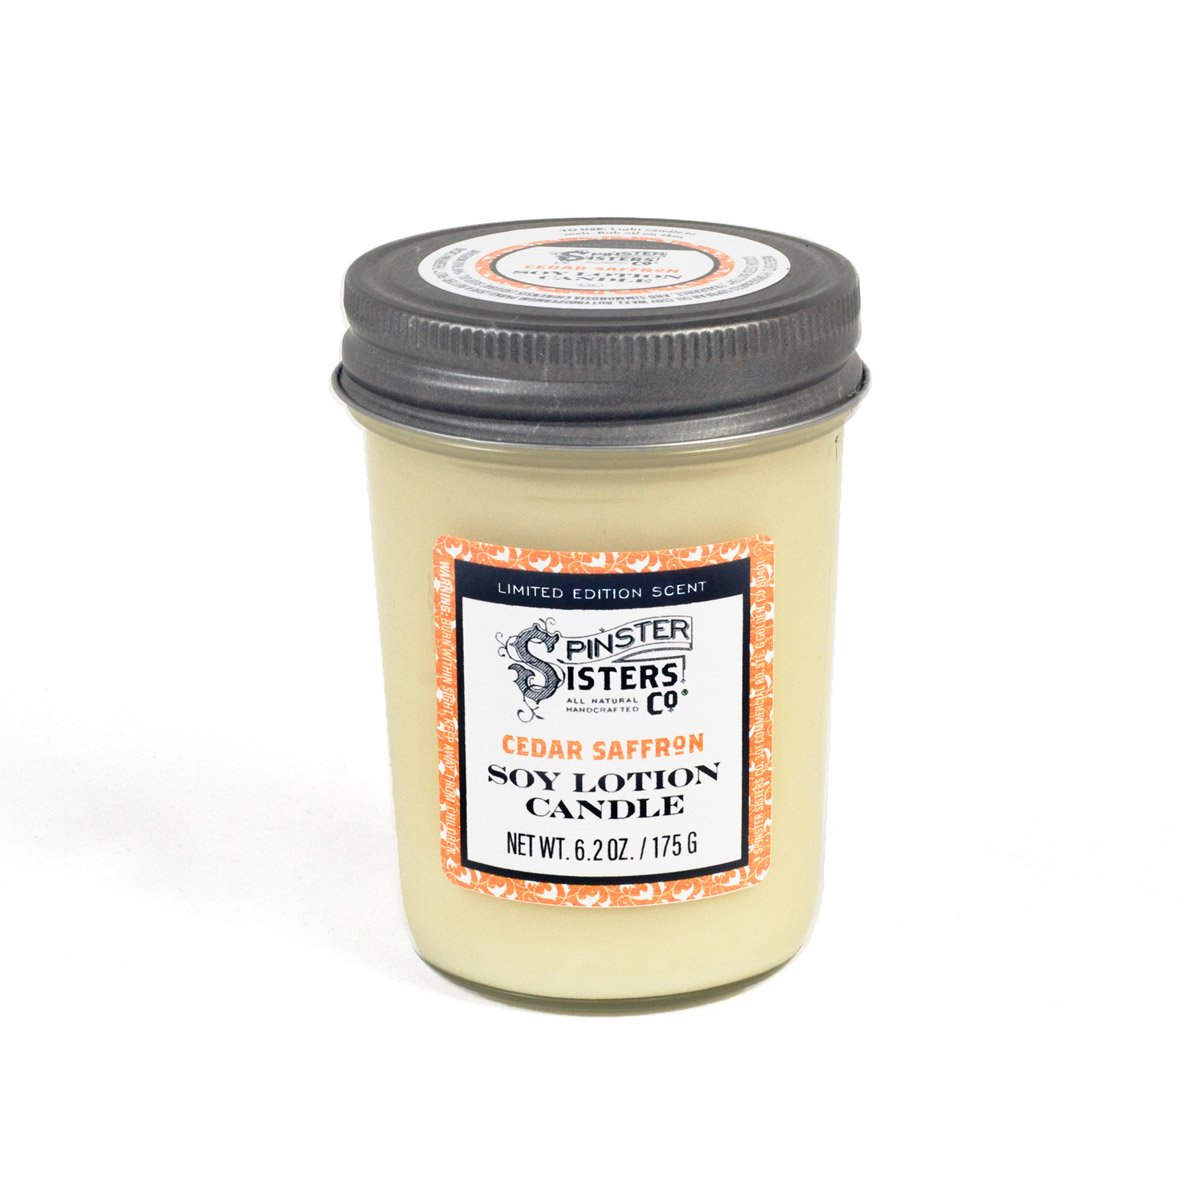 Spinster Sisters Soy Candle - Cedar Saffron